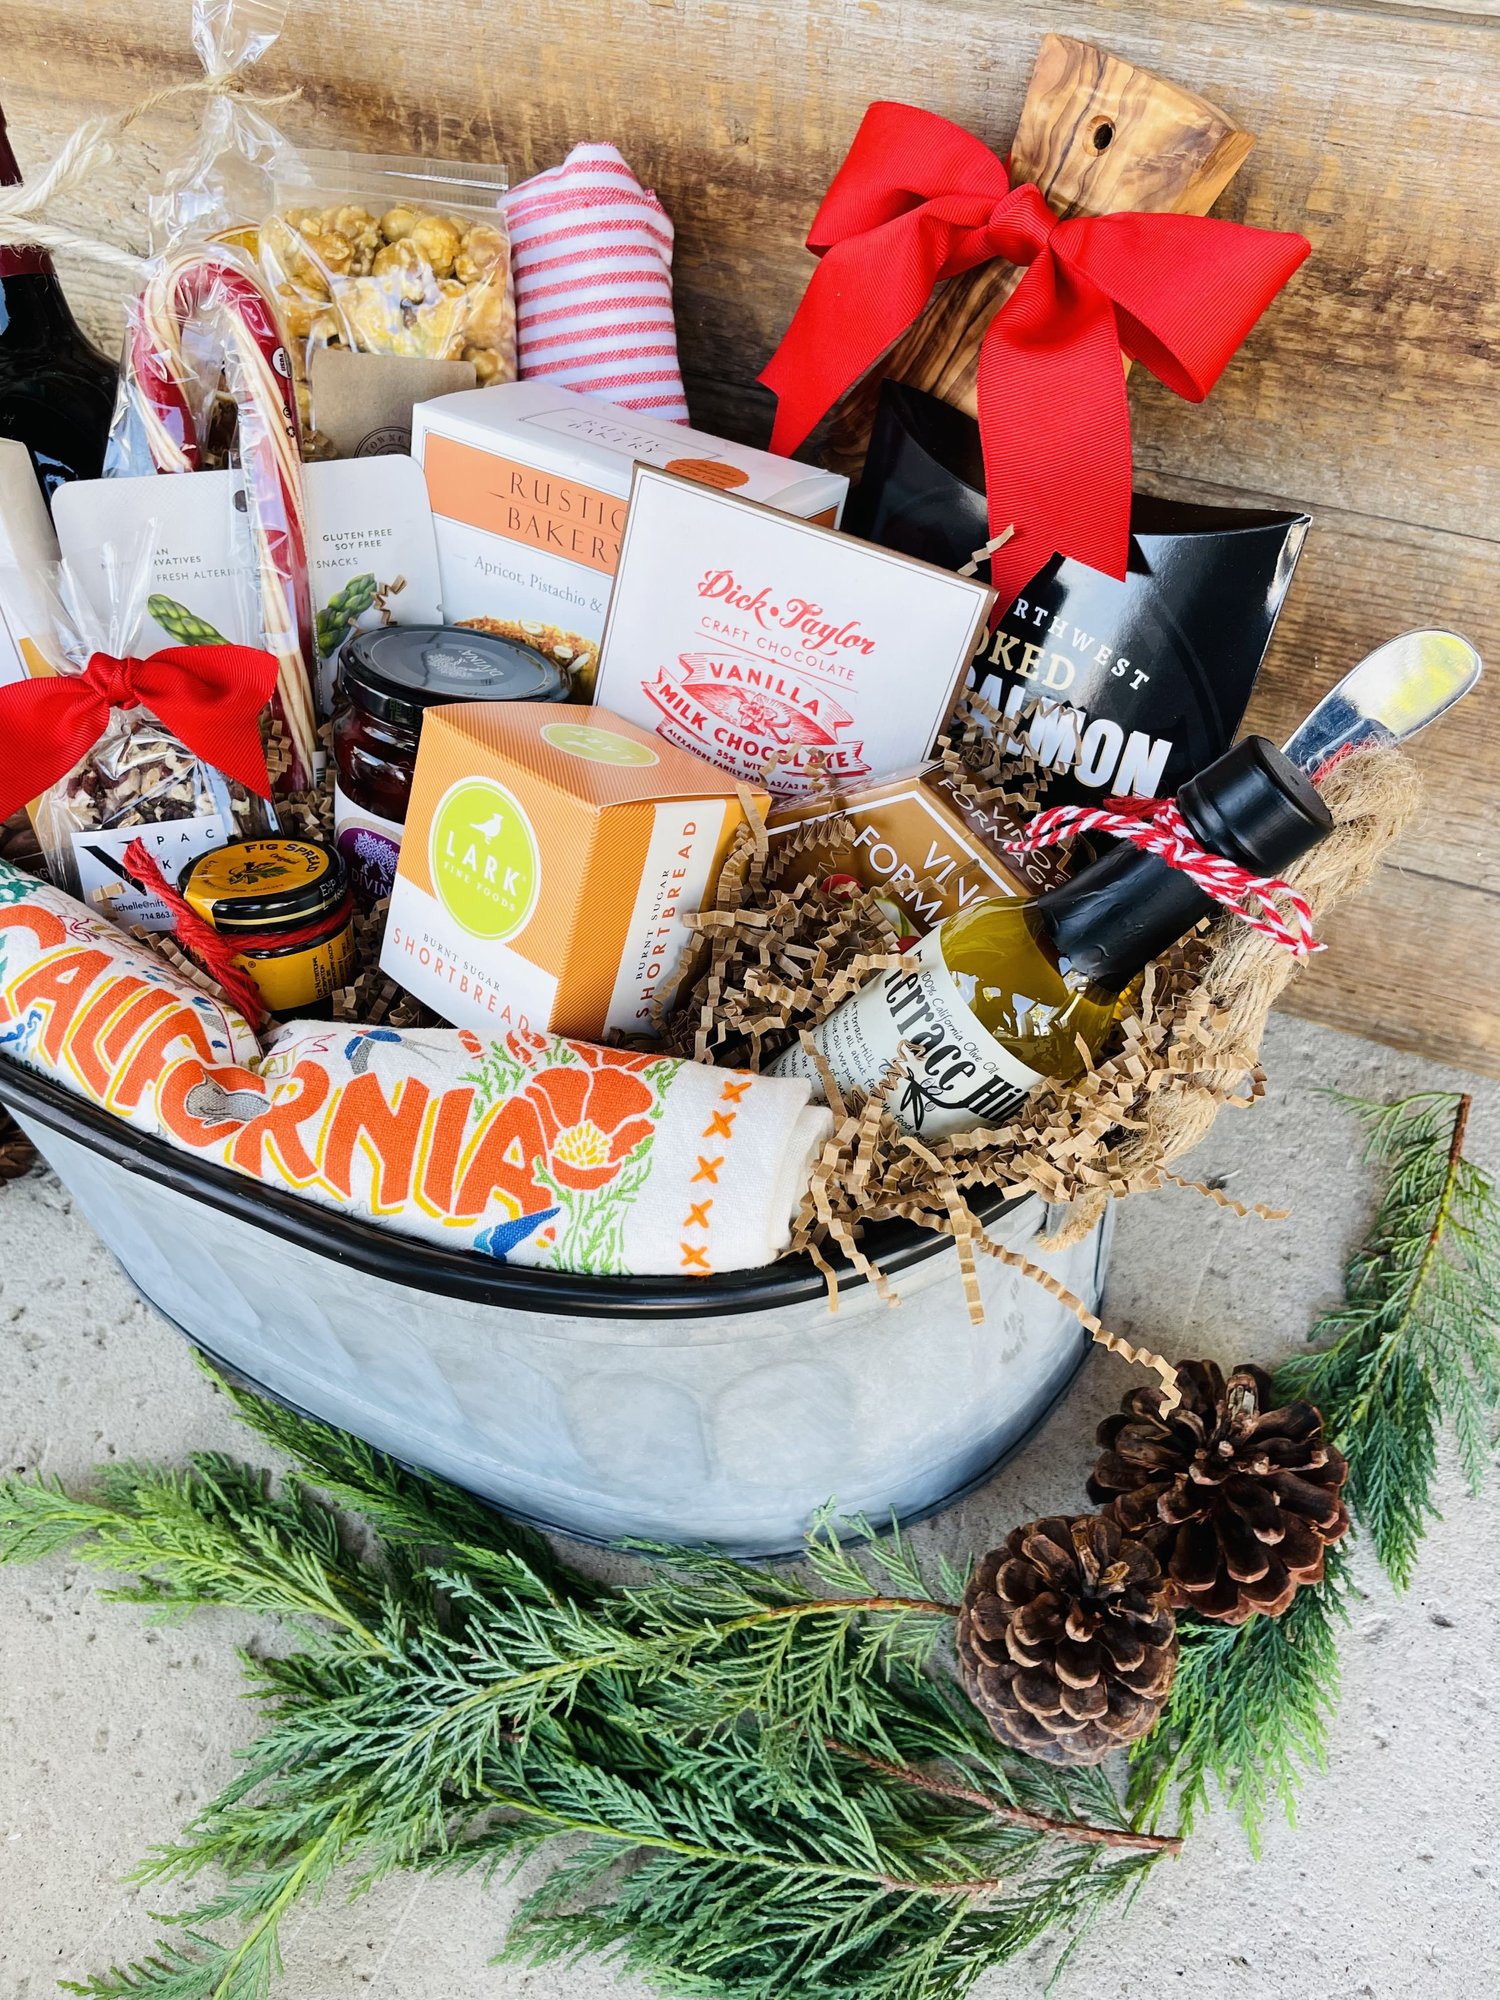 Orange County Wine Gift Basket - Supreme — Nifty Package Co.